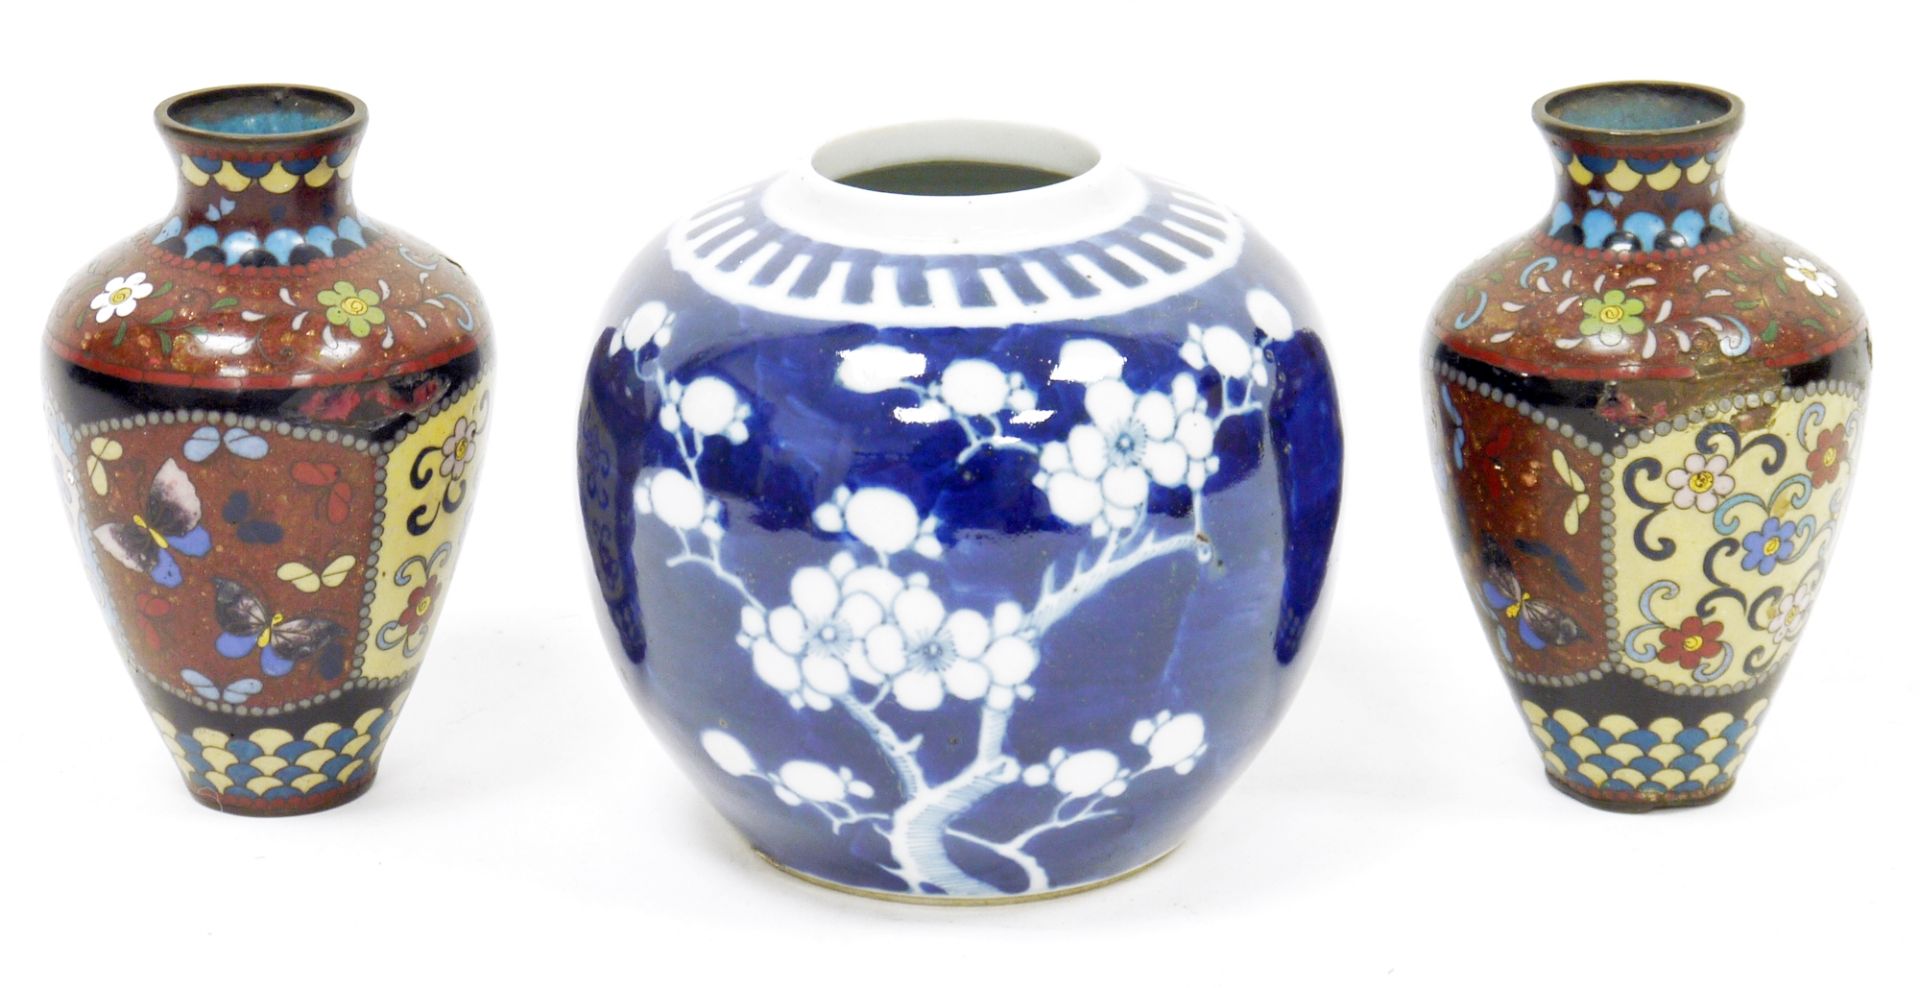 Pair of Japanese cloisonne Meiji period (1868-1912) enamel small oviform vases, each decorated - Image 2 of 2